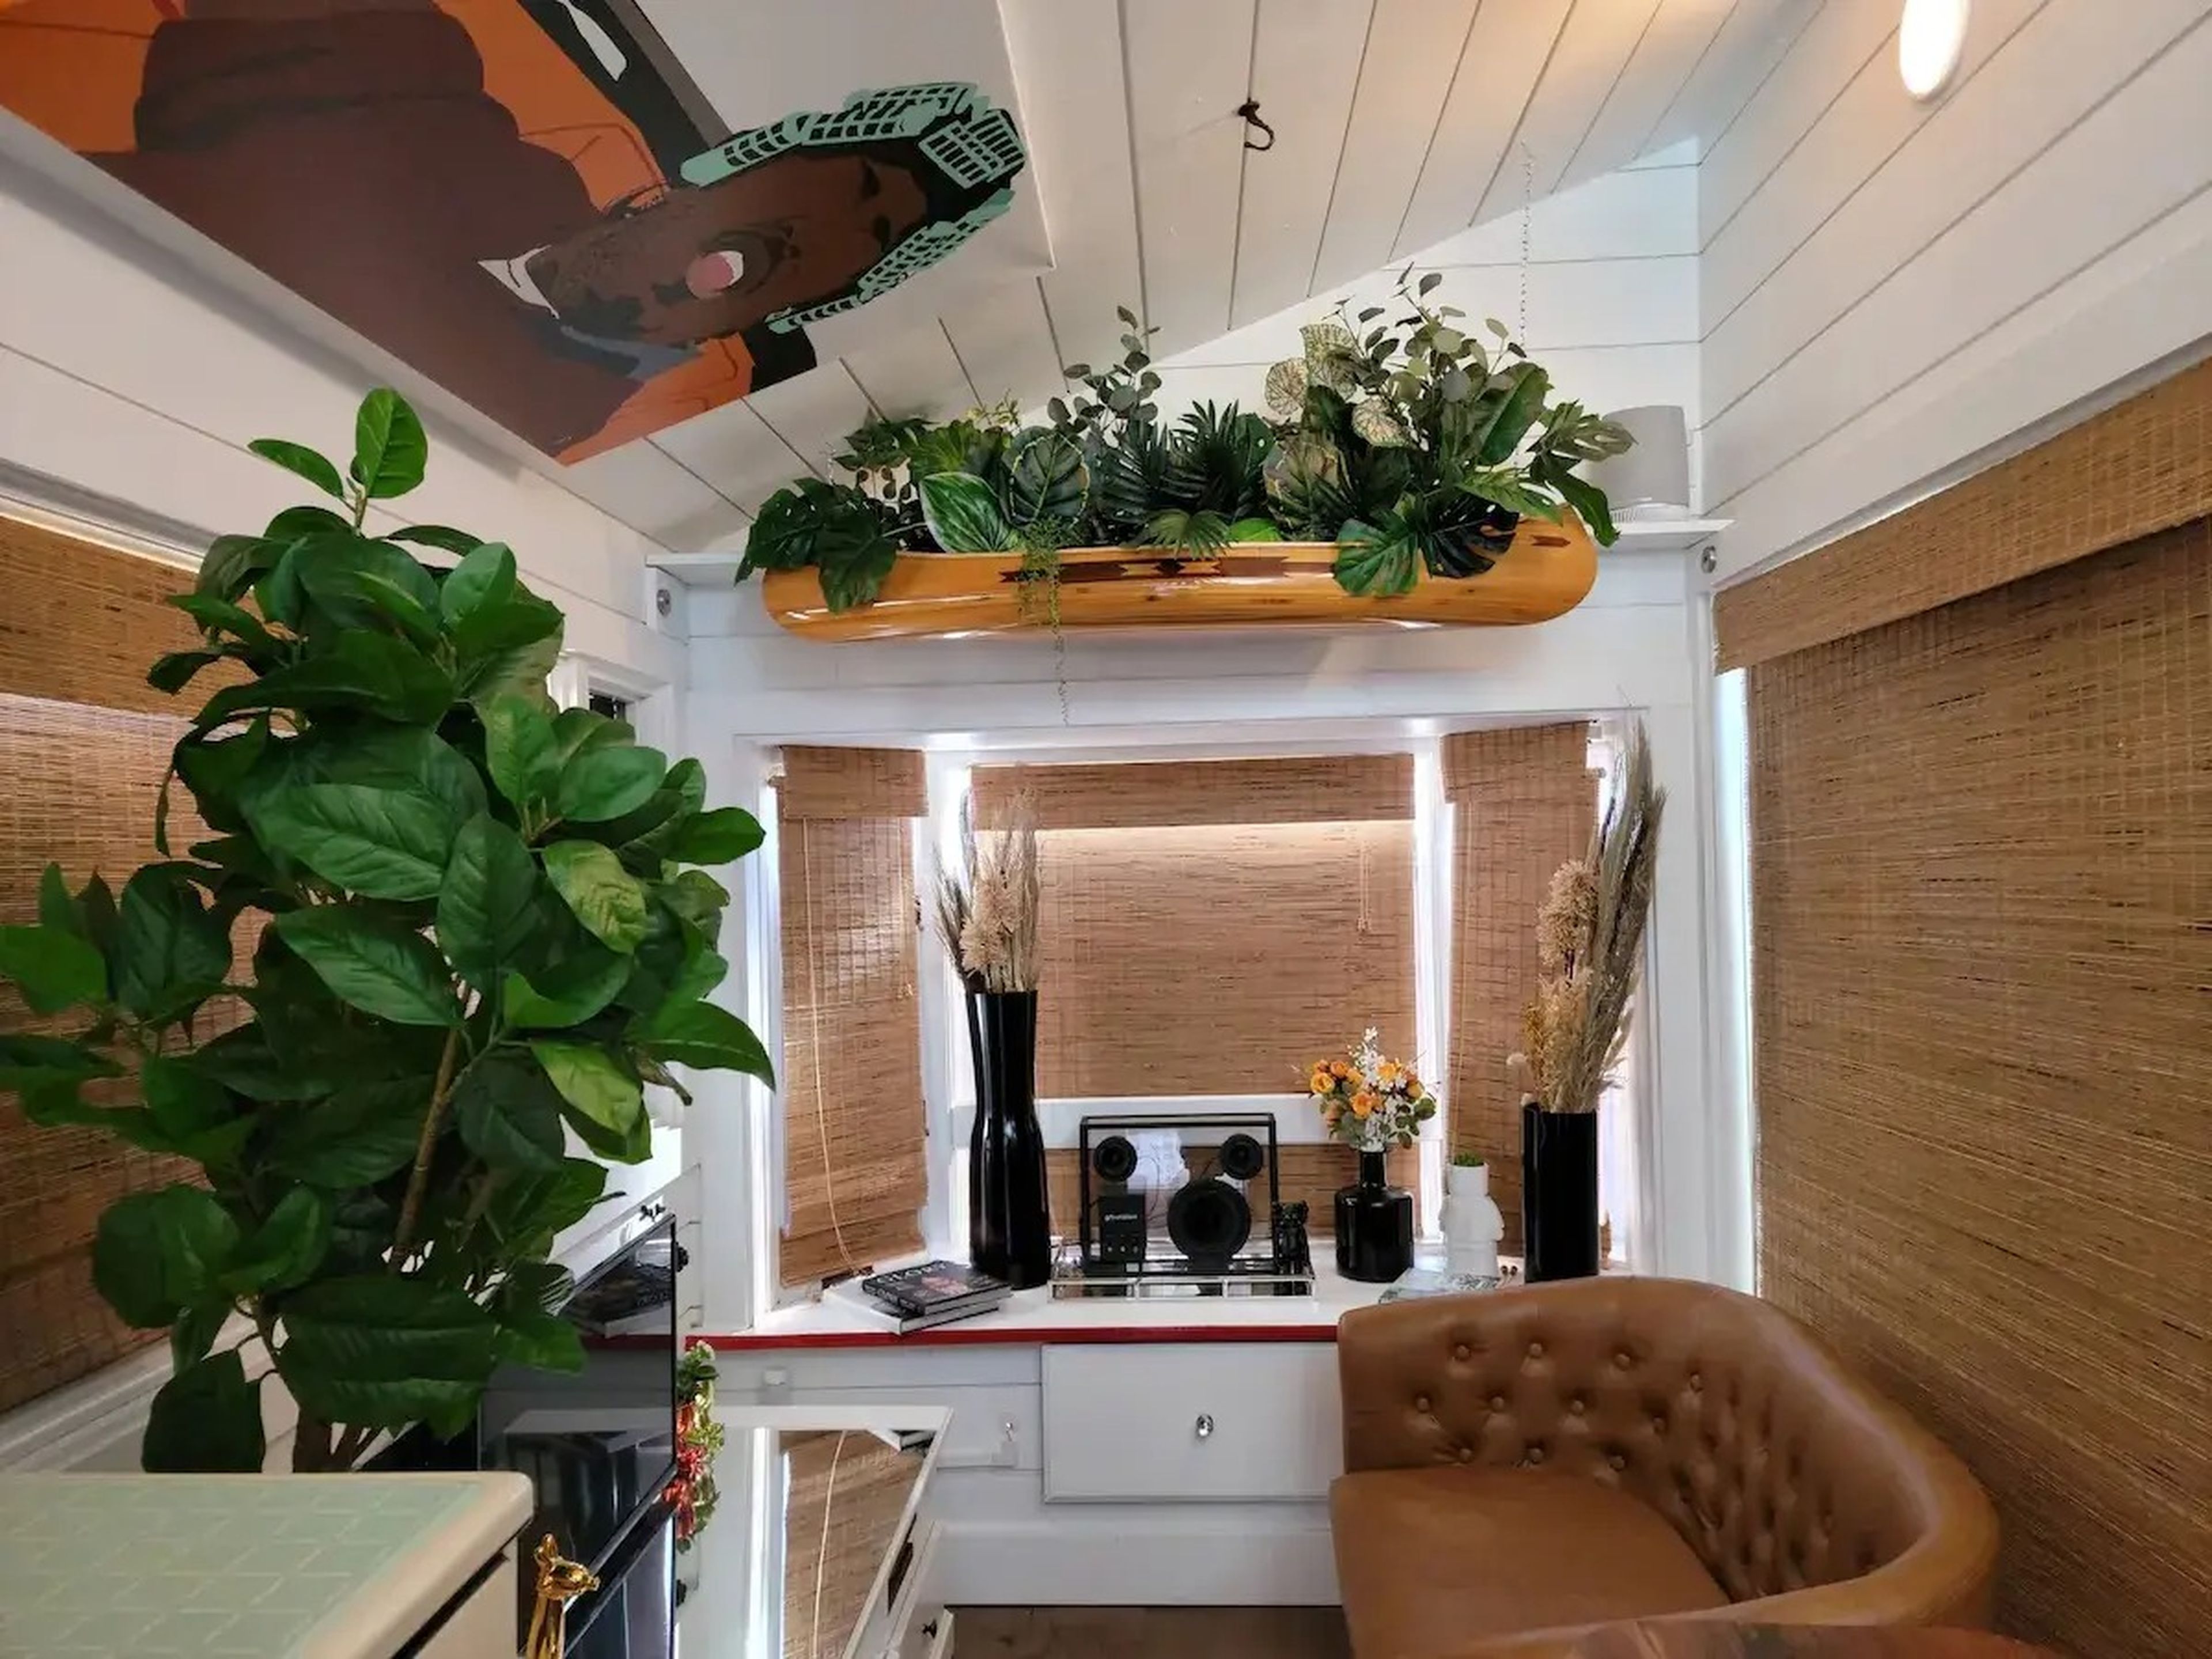 The living space in Ansel Troy's Airbnb with potted plants and a small couch in front of a TV.